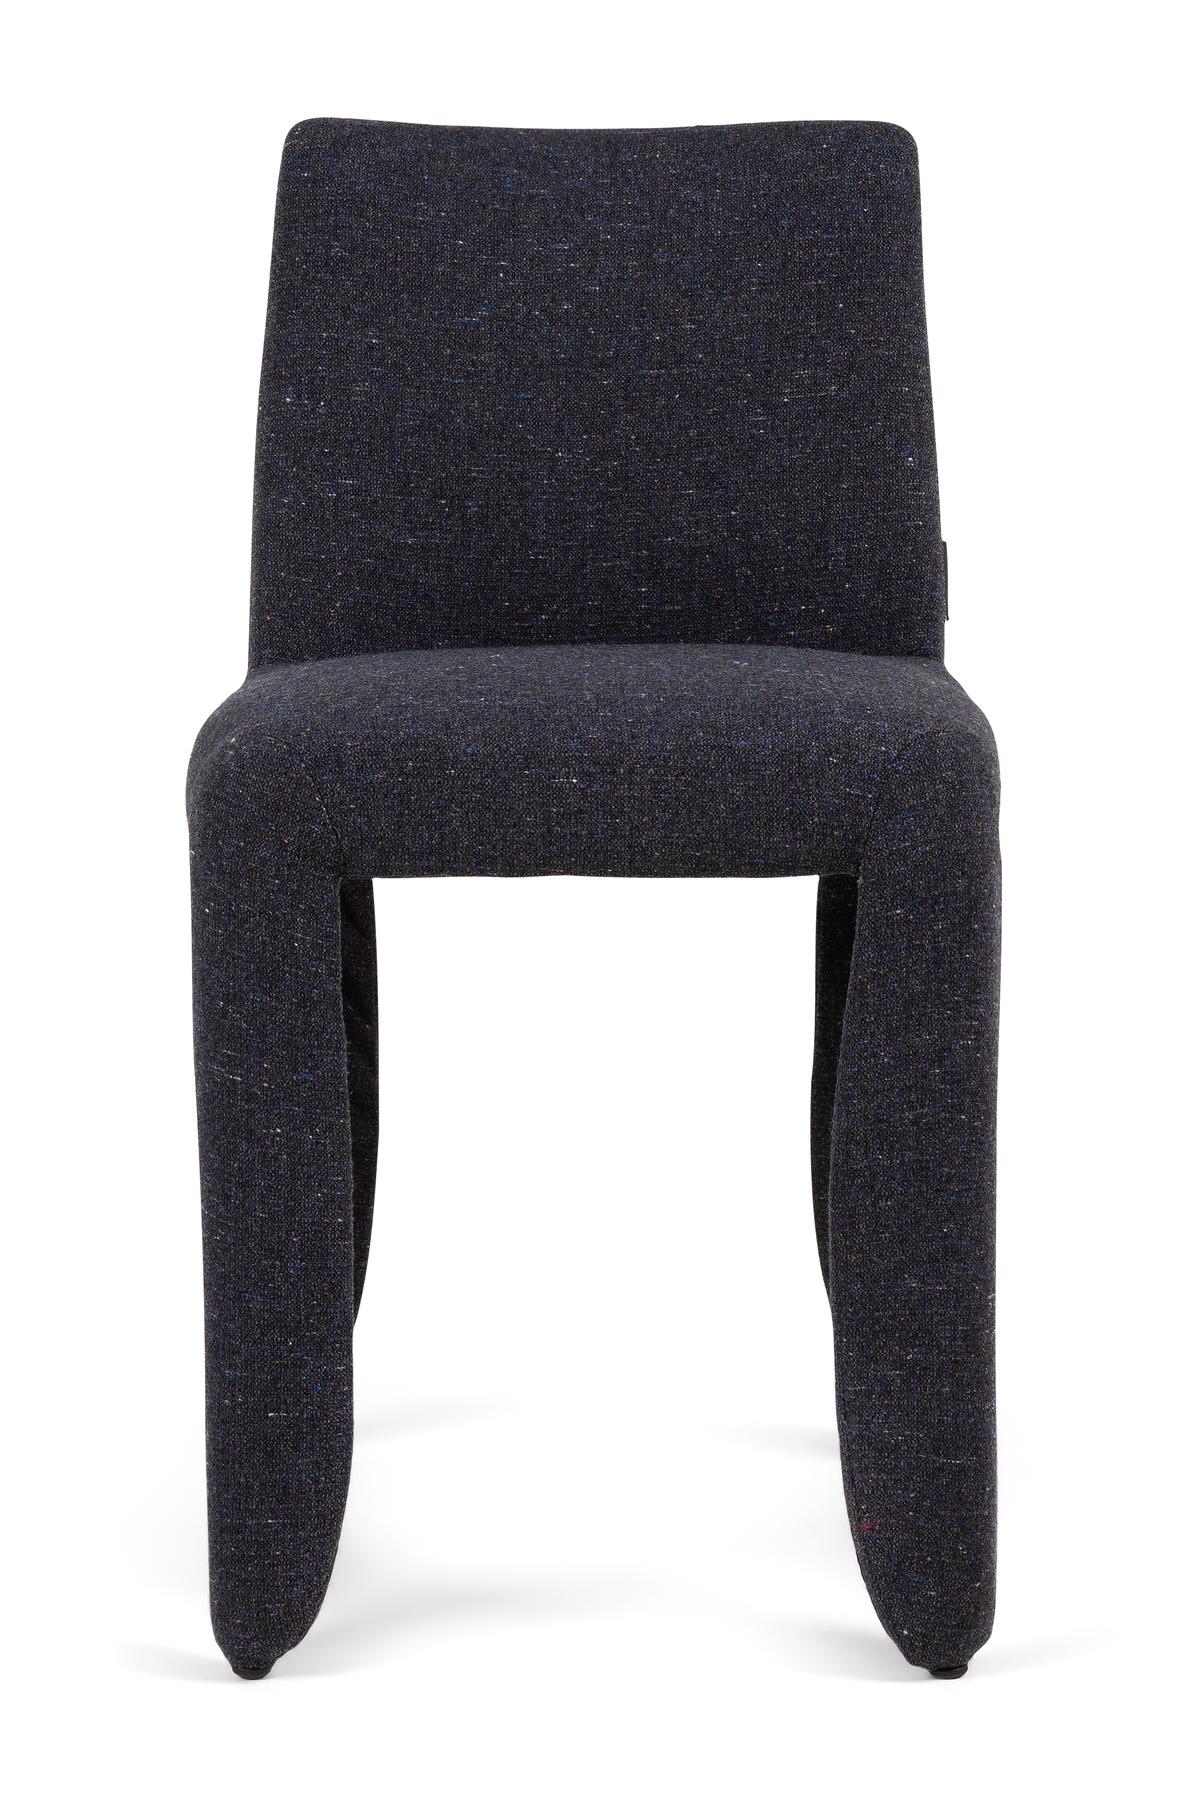 A soft, puffy and stylish chair as symbol of the eternal battle between opposite forces that take place in life and can be easily recognized inside ourselves, if we have the courage to open our eyes. Scary? Not at all! You forget all about the